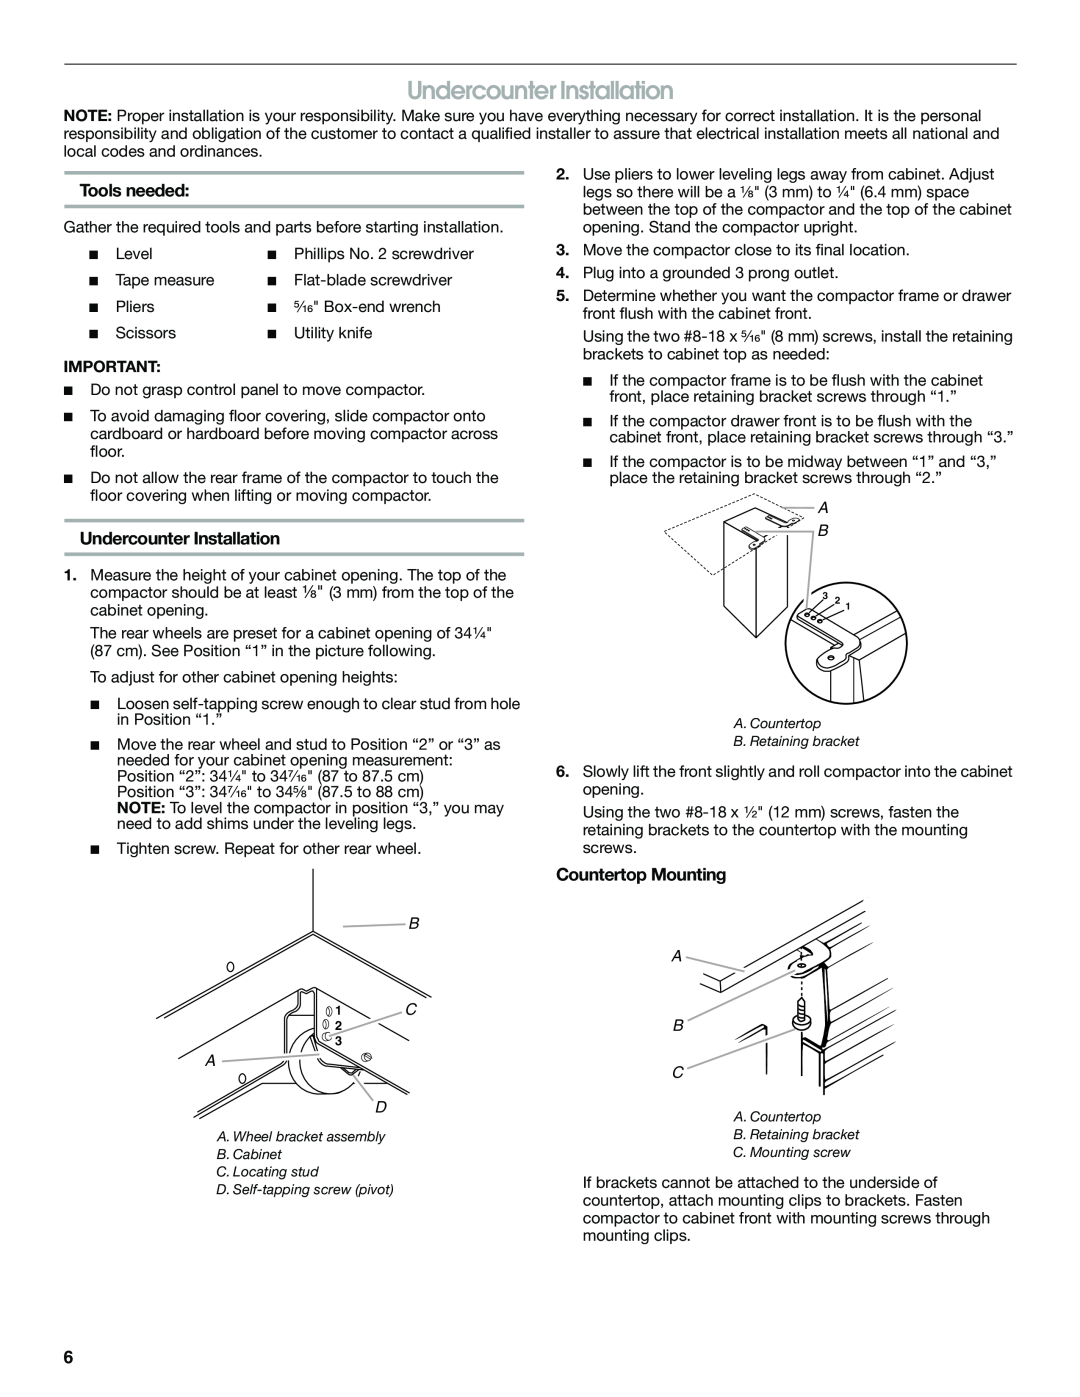 Jenn-Air W10242571A manual Undercounter Installation, Tools needed, Countertop Mounting 